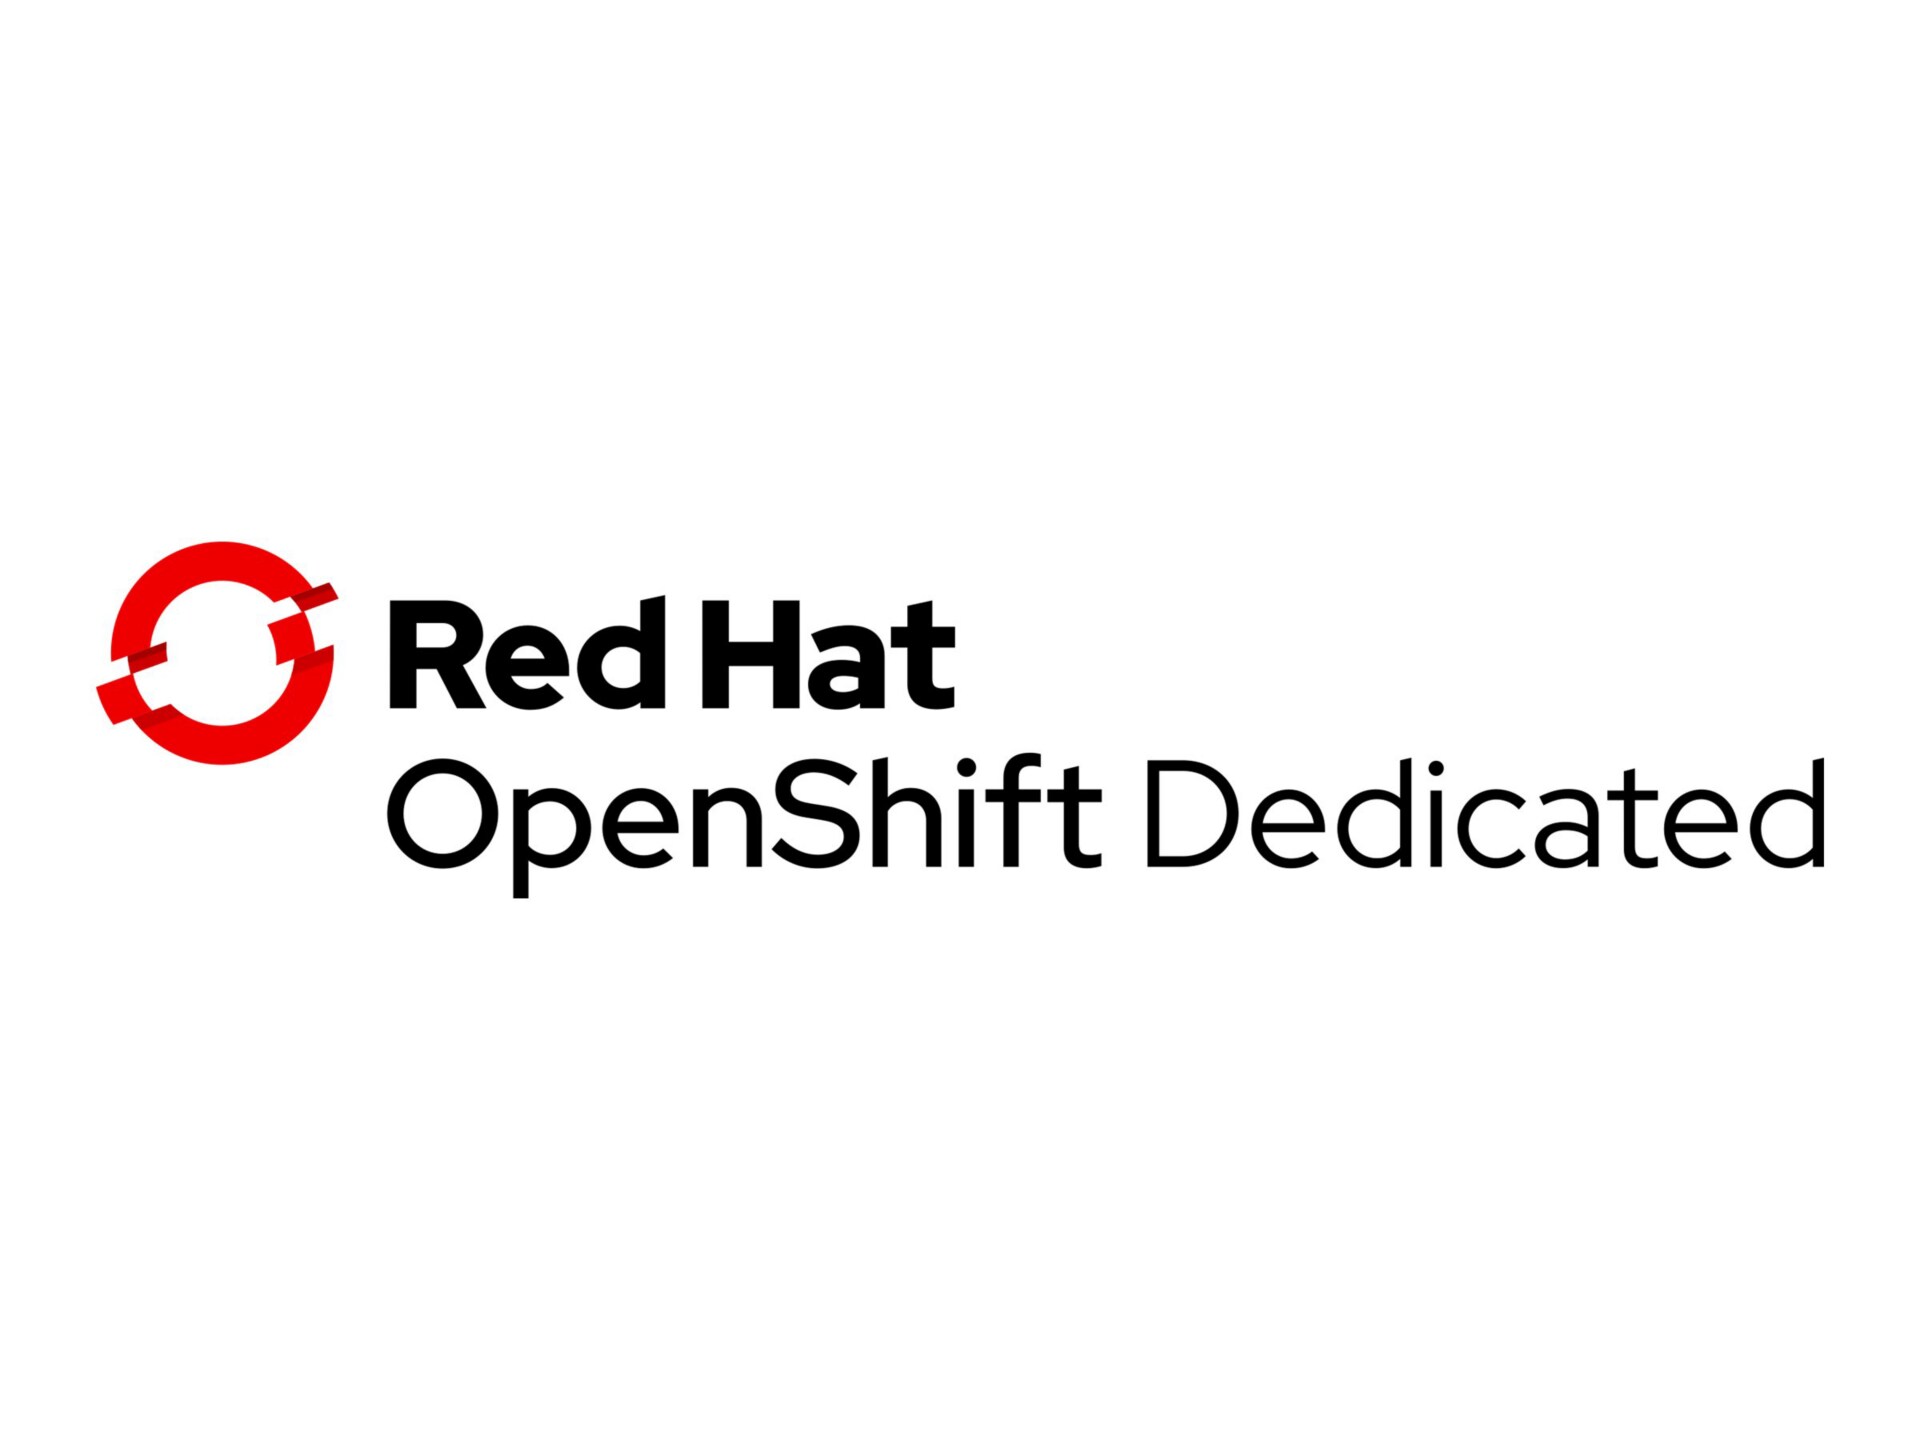 Red Hat OpenShift Dedicated Customer Cloud Subscription - subscription lice